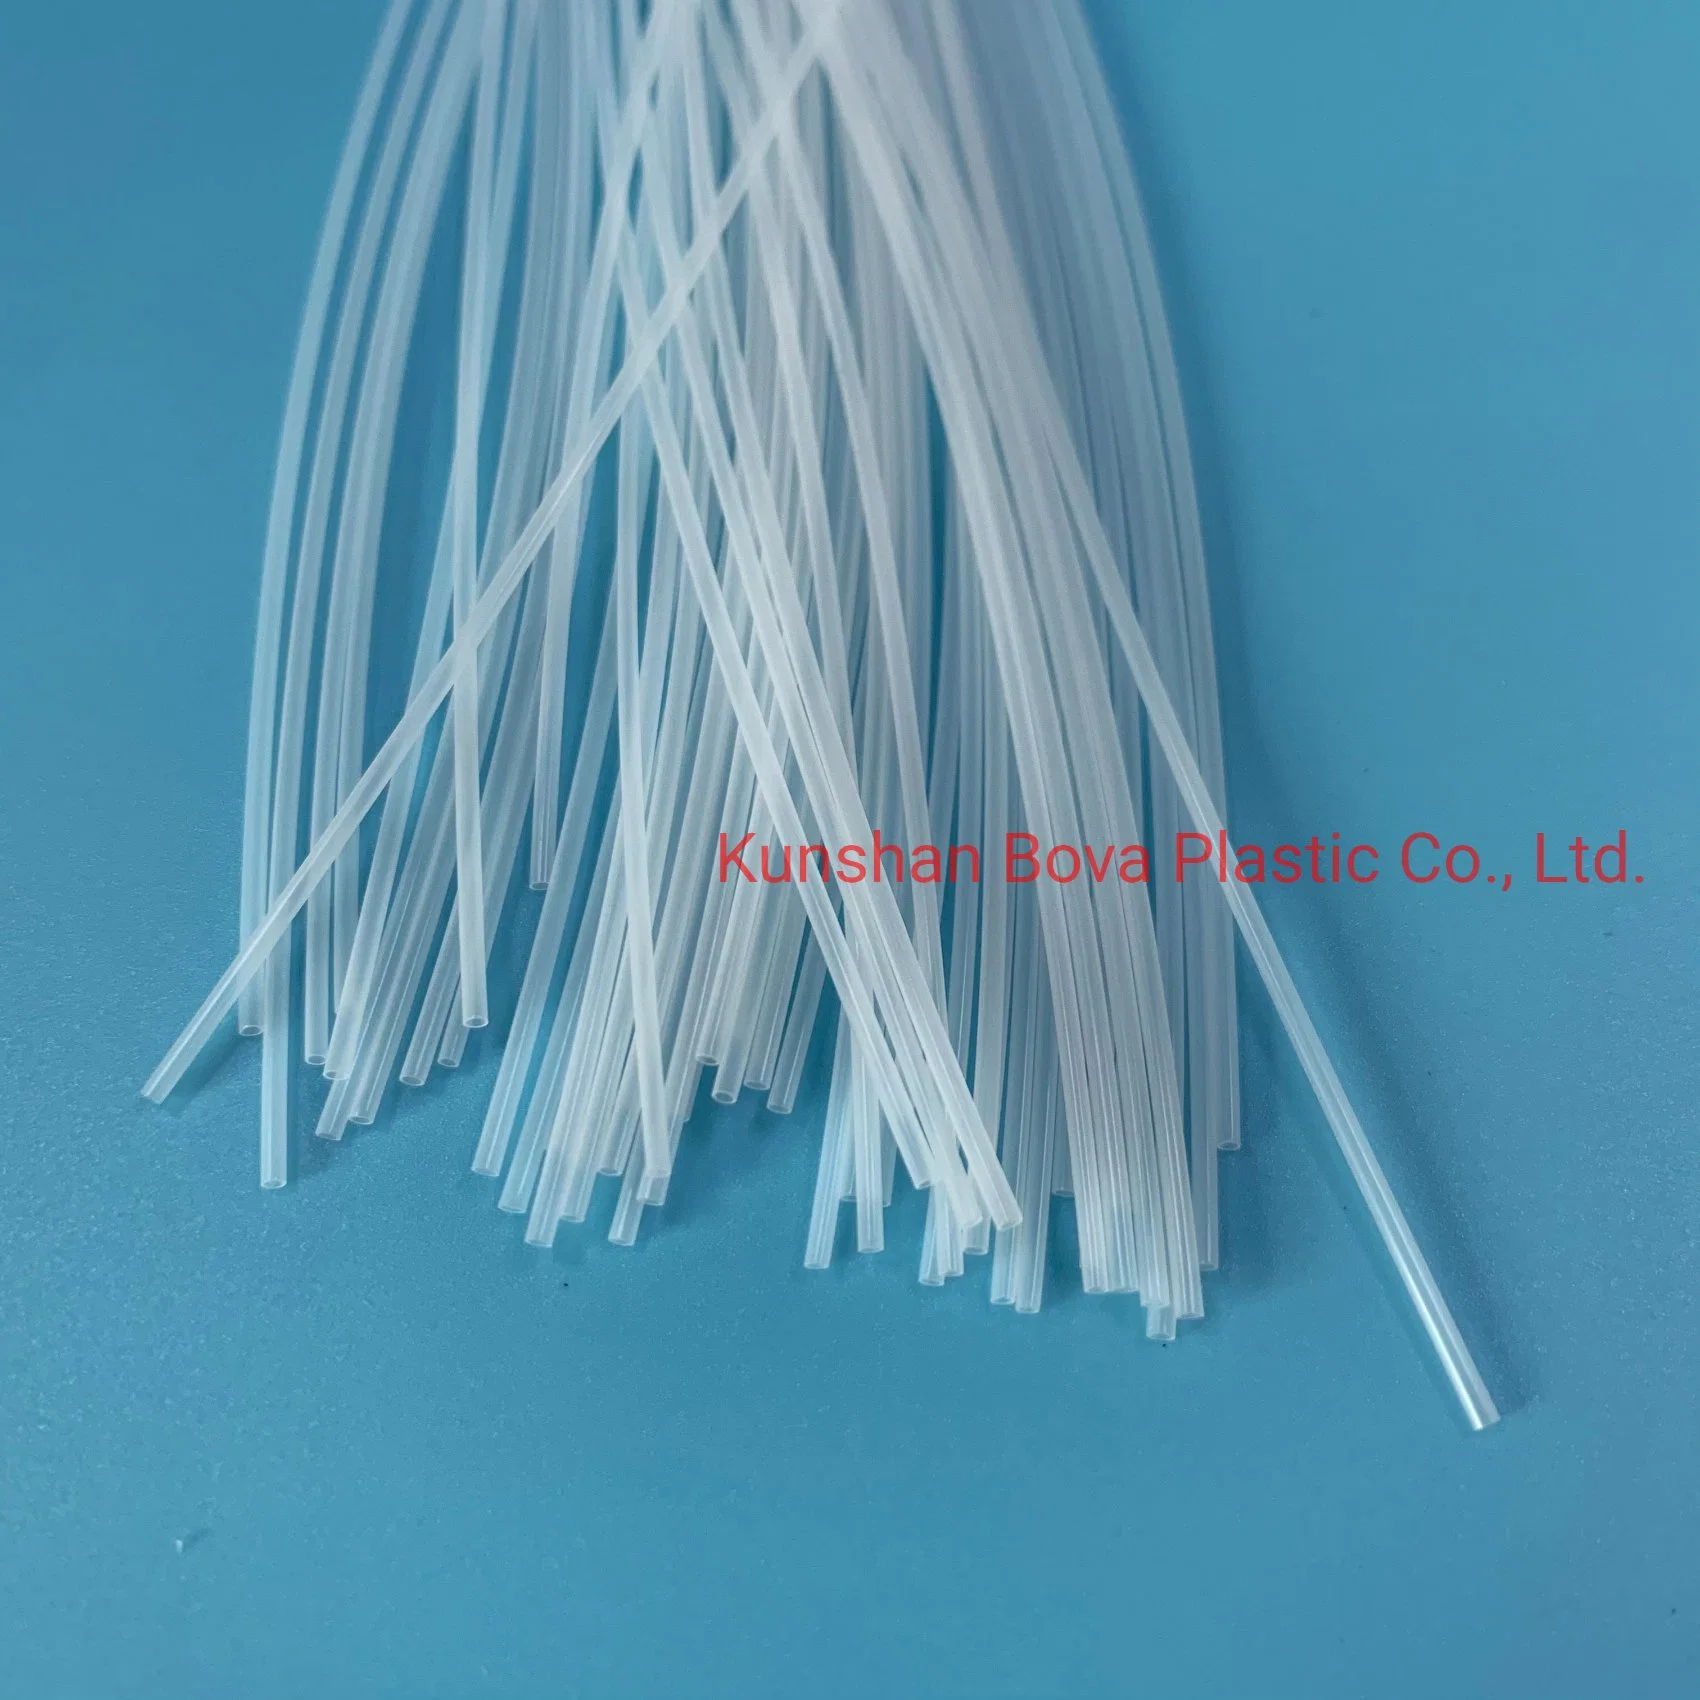 Universal Manfuacture Extrusion Plastic Tube for Device Sheath